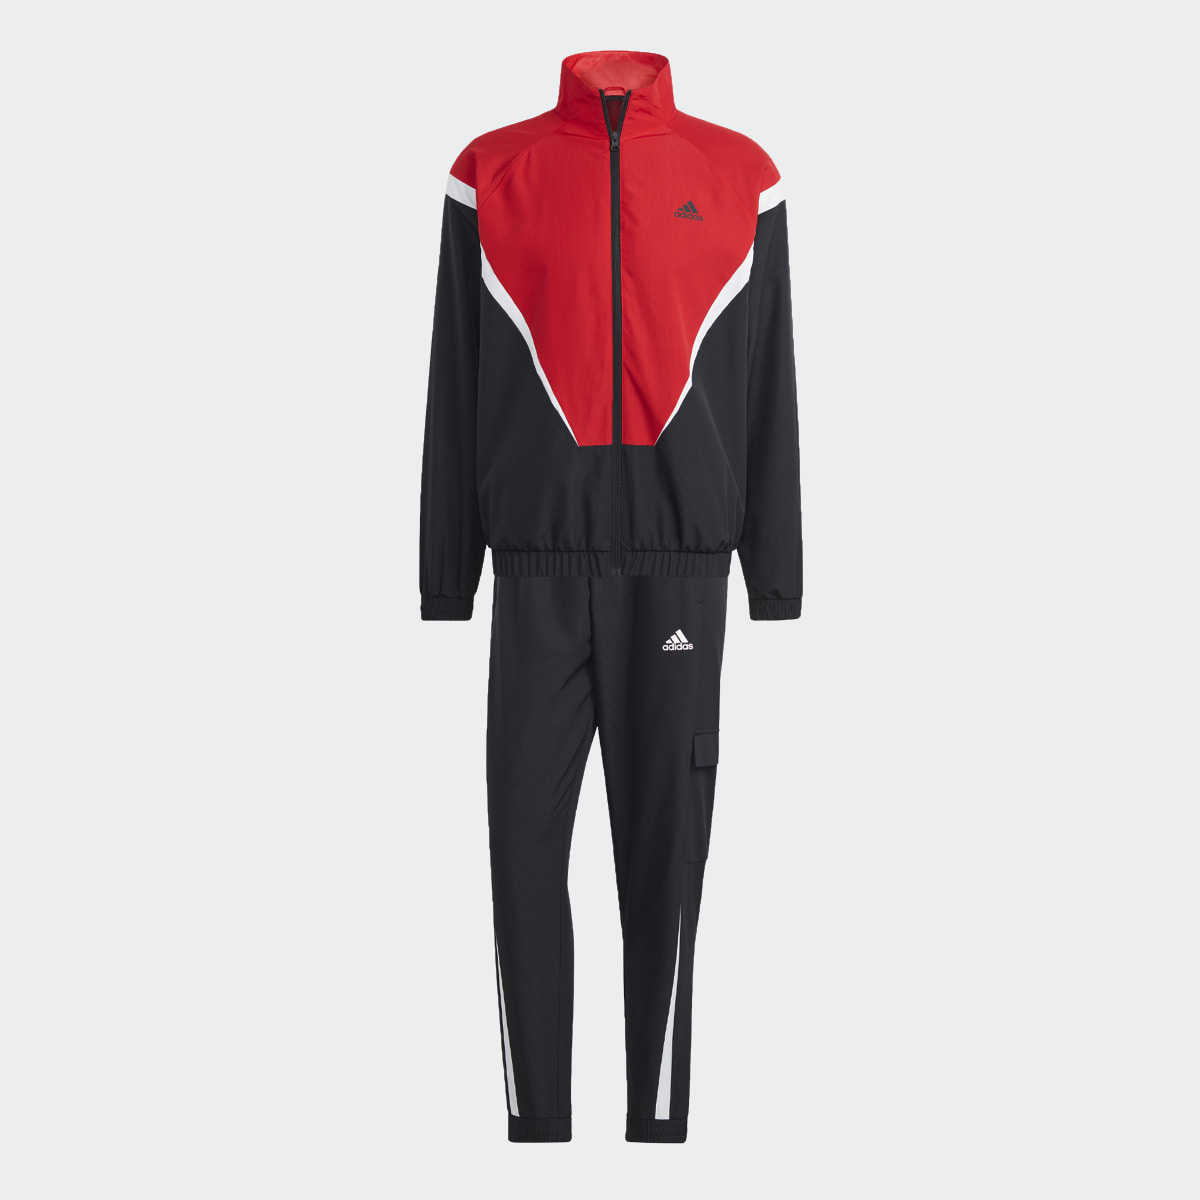 Adidas Sportswear Woven Non-Hooded Tracksuit. 5